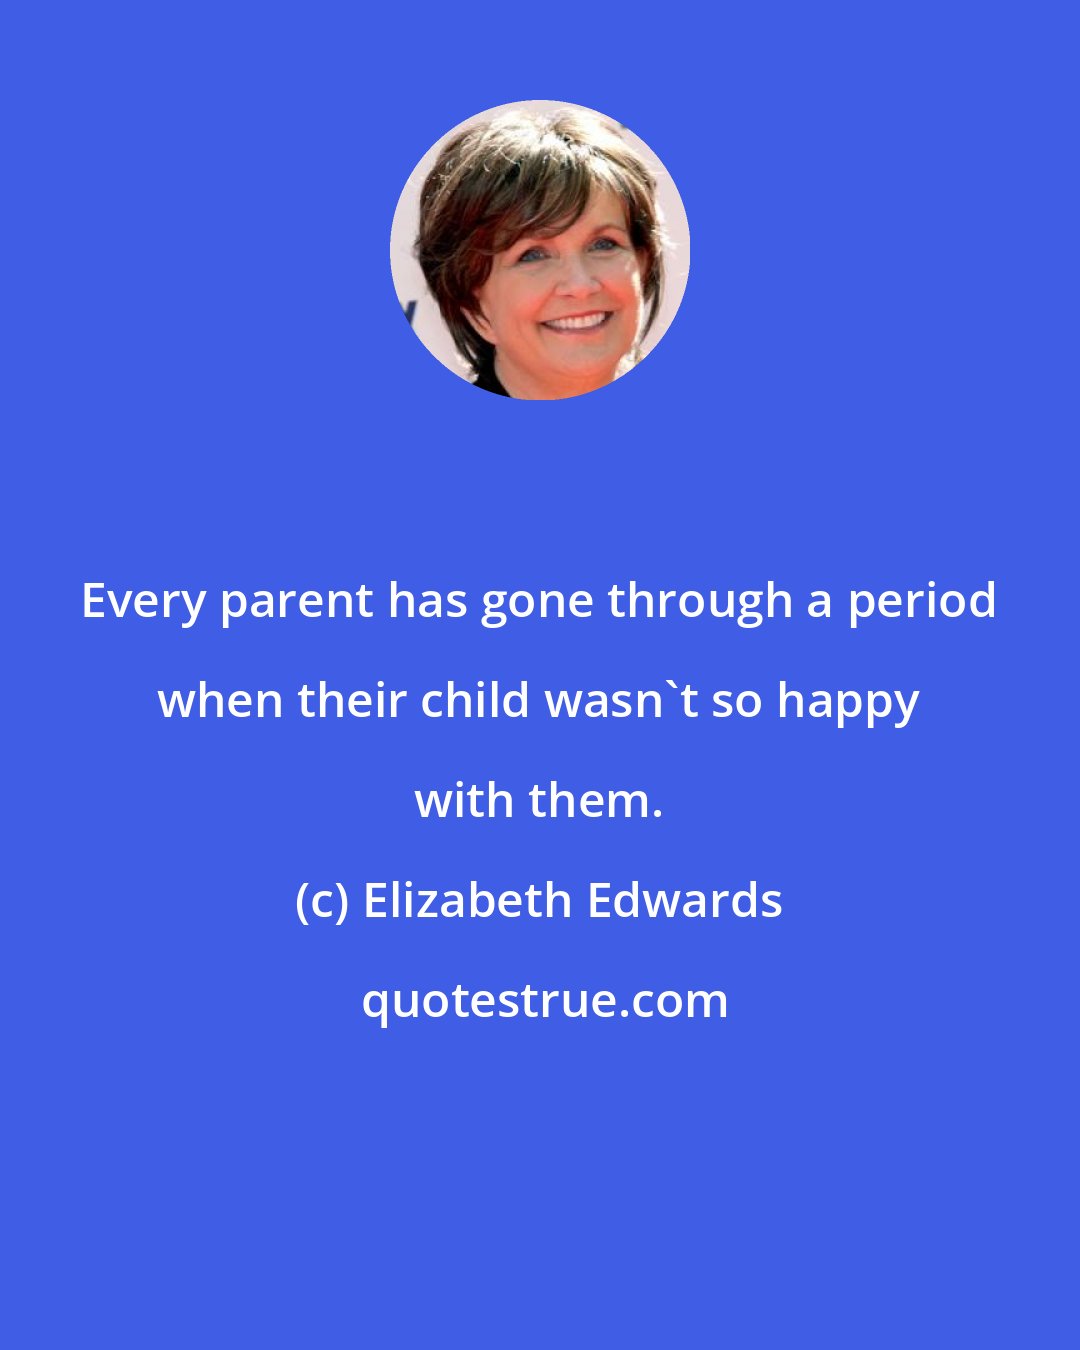 Elizabeth Edwards: Every parent has gone through a period when their child wasn't so happy with them.